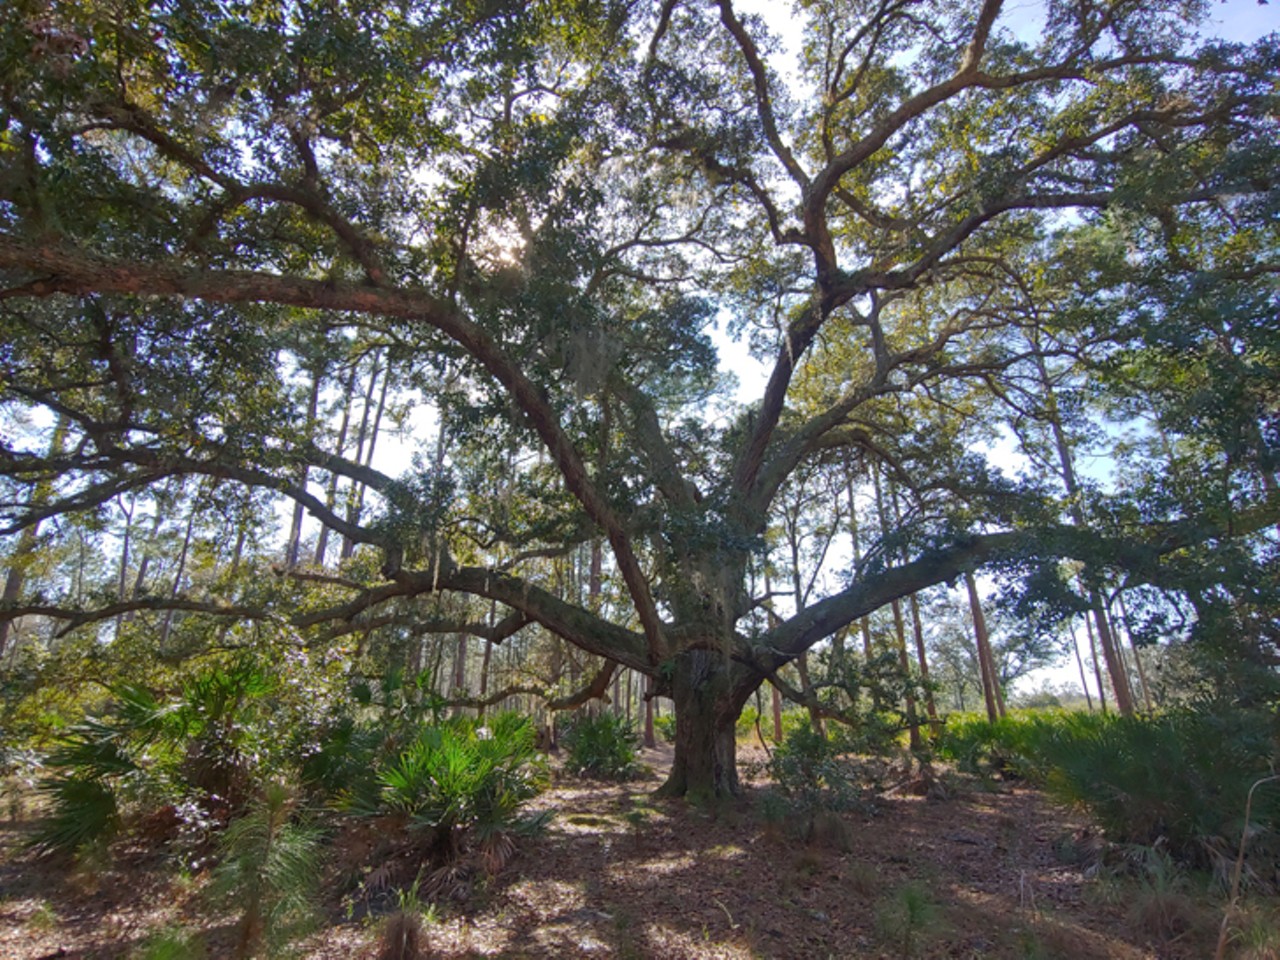 Take a look at Orange County's Split Oak Forest before it's destroyed by a new highway